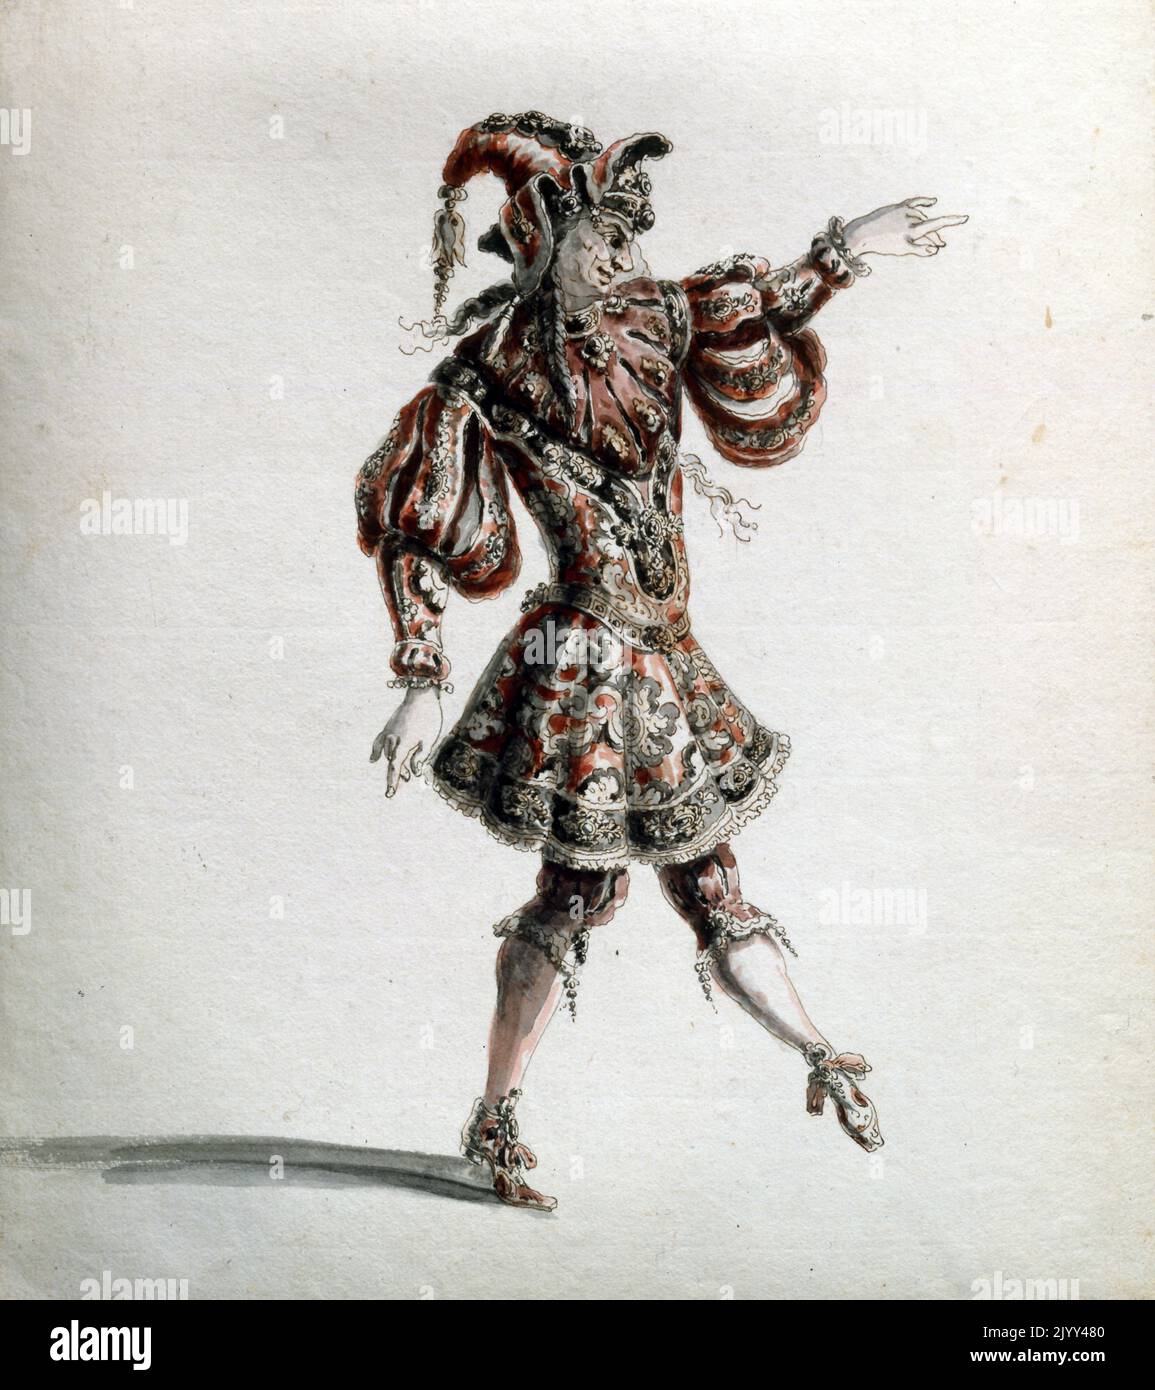 Costume design by Jean Berain (1640-1711). Costume of a Hero, from the opera 'Amadis' by Lully. Pen ink and watercolour. Amadis or Amadis de Gaule (Amadis of Gaul) is a tragedie en musique in a prologue and five acts by Jean-Baptiste Lully to a libretto by Philippe Quinault based on Nicolas Herberay des Essarts' adaptation of Garci Rodriguez de Montalvo's Amadis de Gaula. It was premiered by the Paris Opera at the Theatre du Palais-Royal sometime from January 15 to 18, 1684. Stock Photo